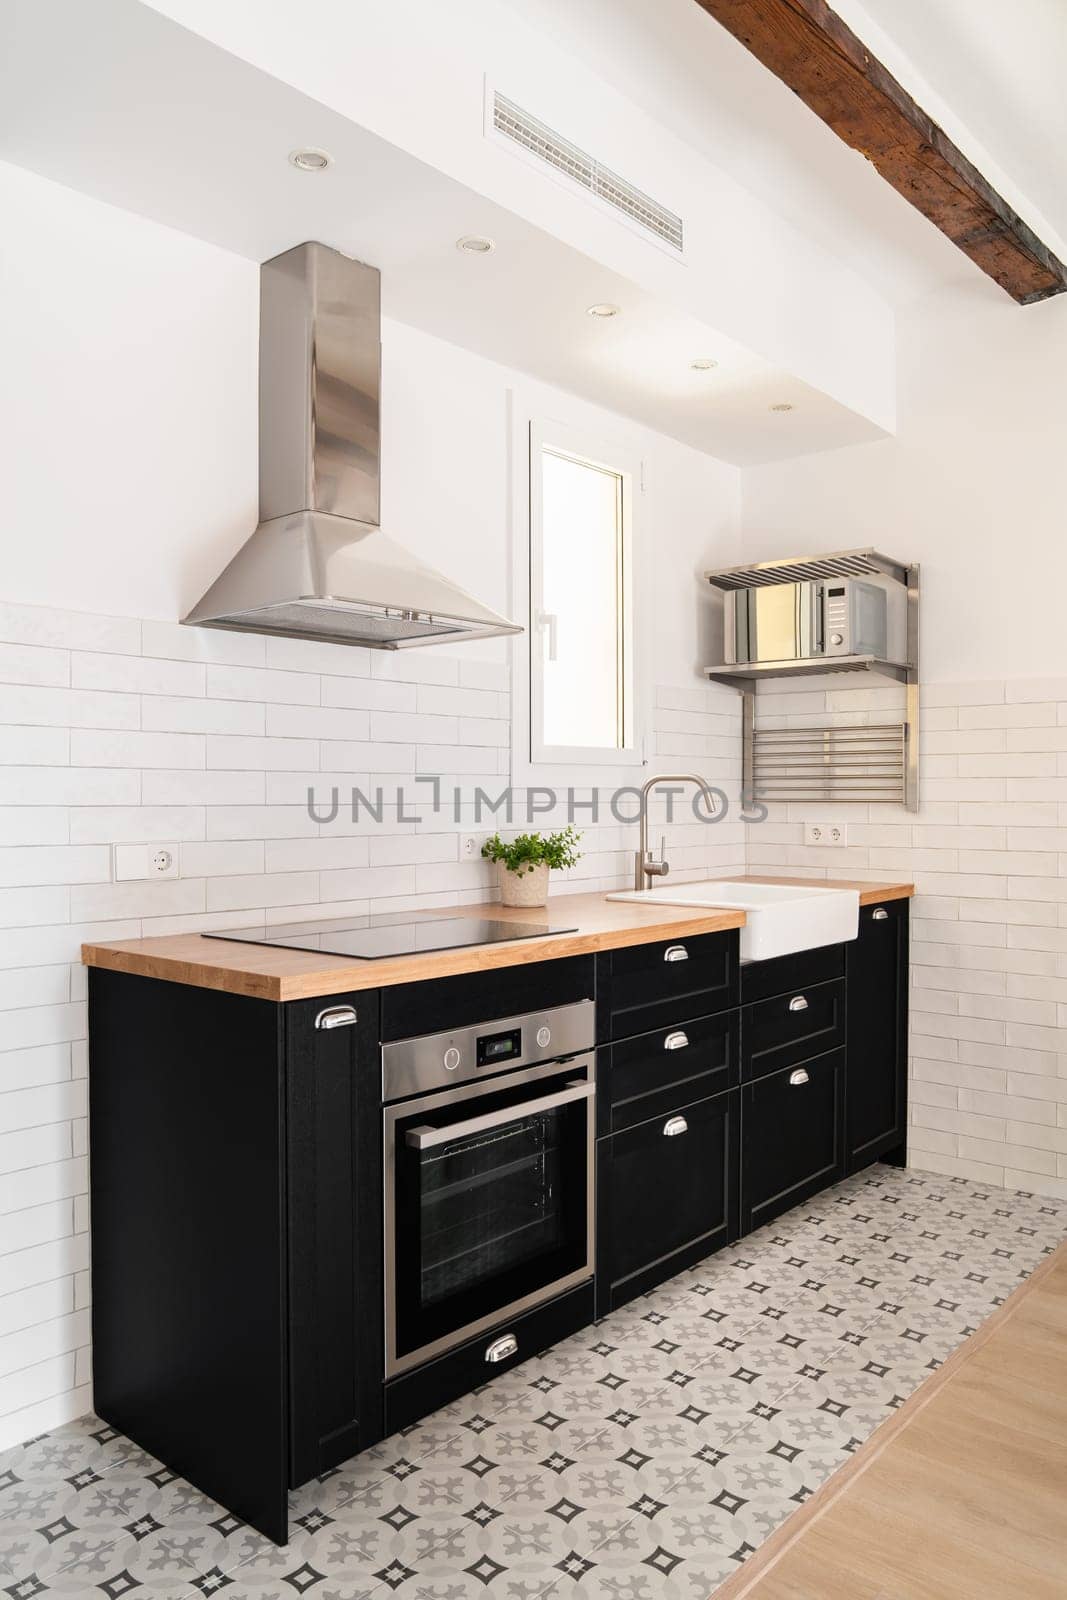 Vertical shot black kitchen island with drawers stove and convection cooker and modern appliances in scandinavian style apartment in new building. Copyspace by apavlin